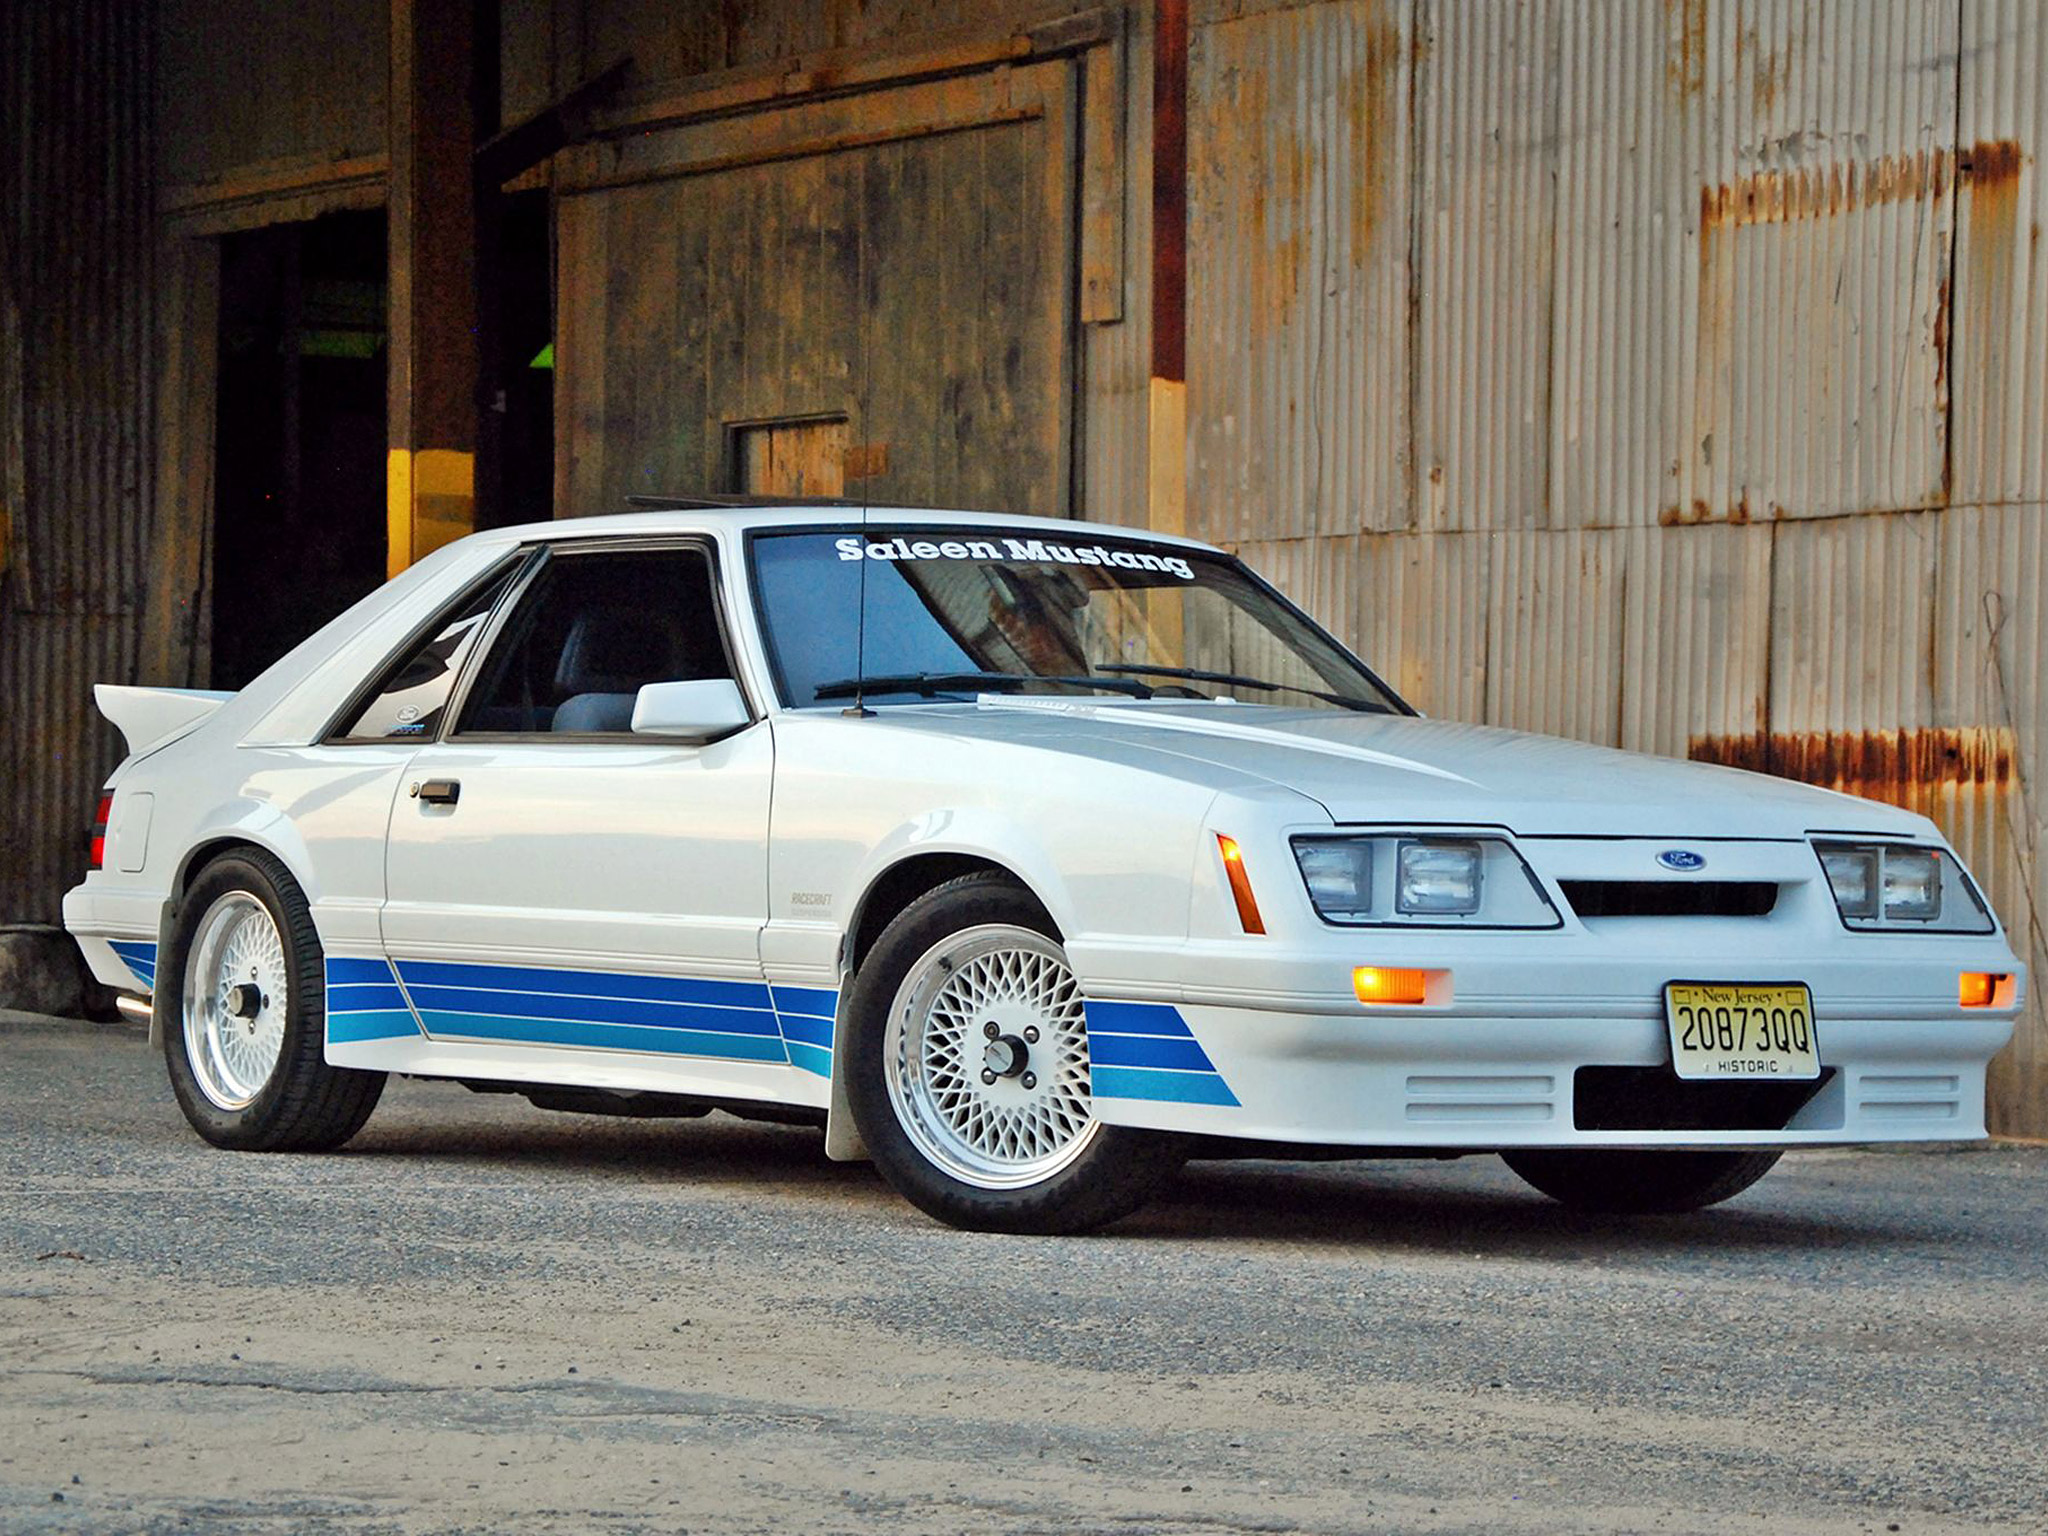 Mustang Of The Day: 1985 Saleen Ford Mustang